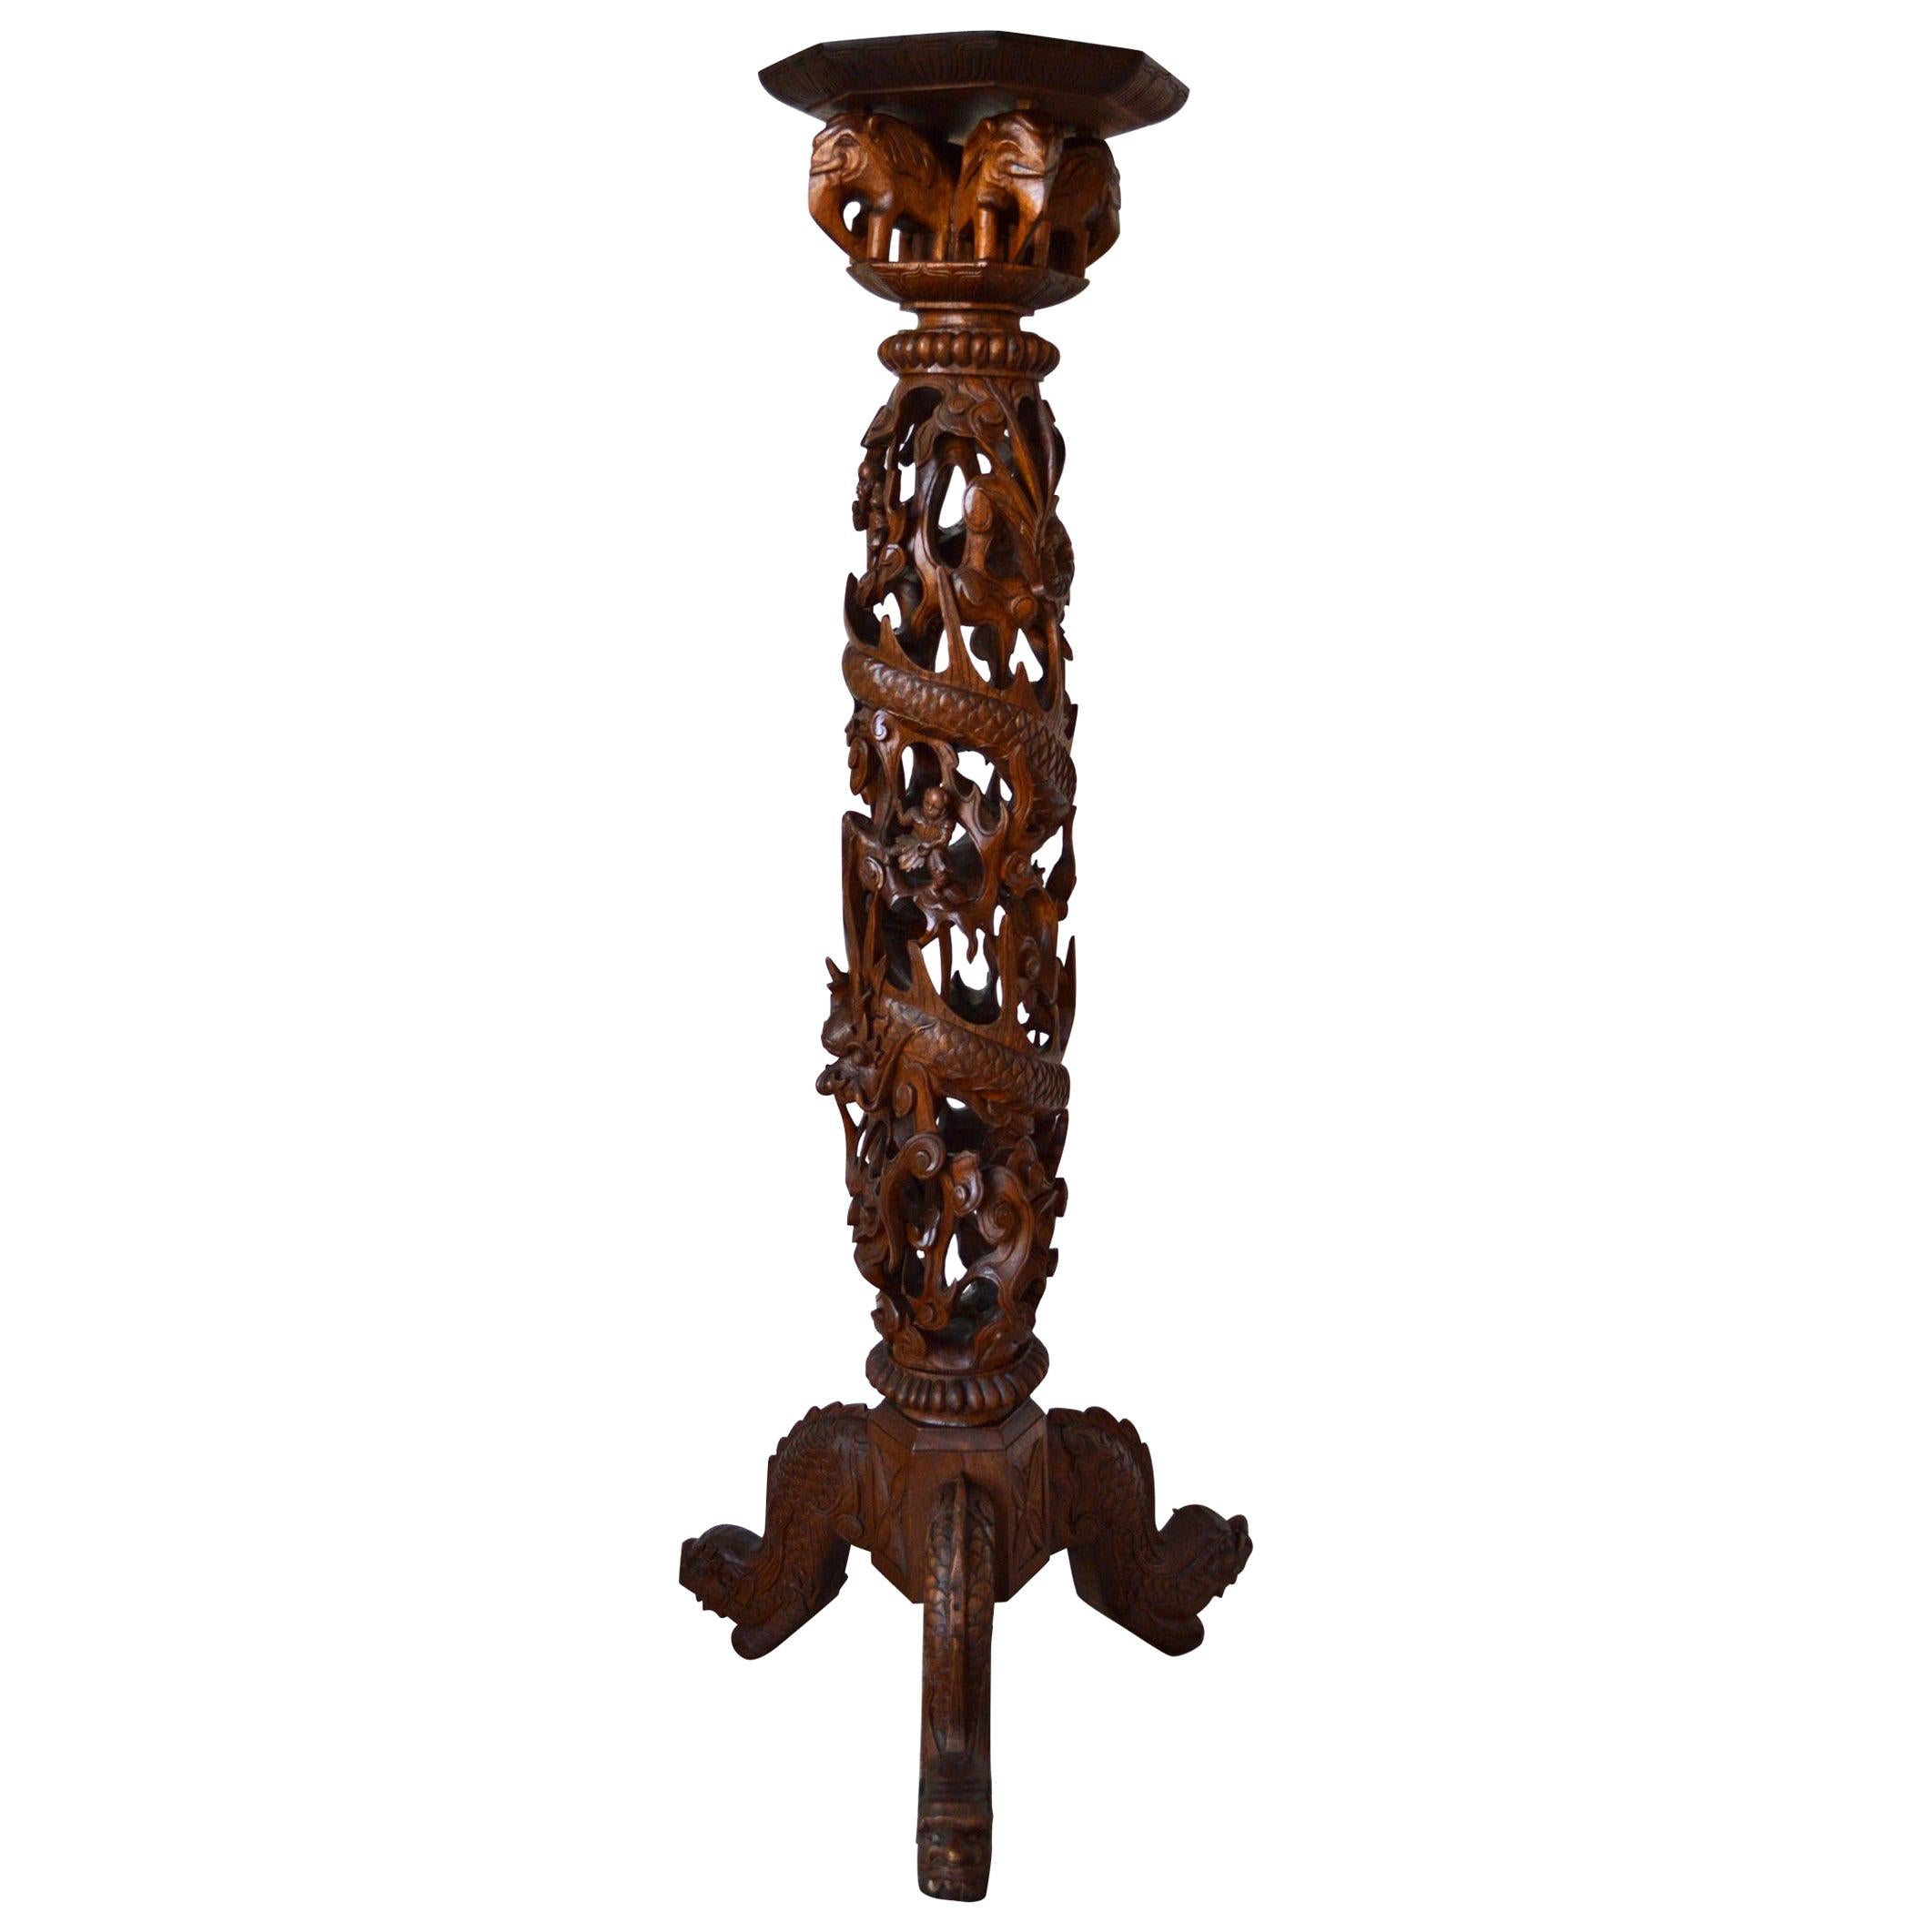 Indochinese Pedestal Table / Pot Stand in Carved Wood, Mythological Theme, 1890s For Sale